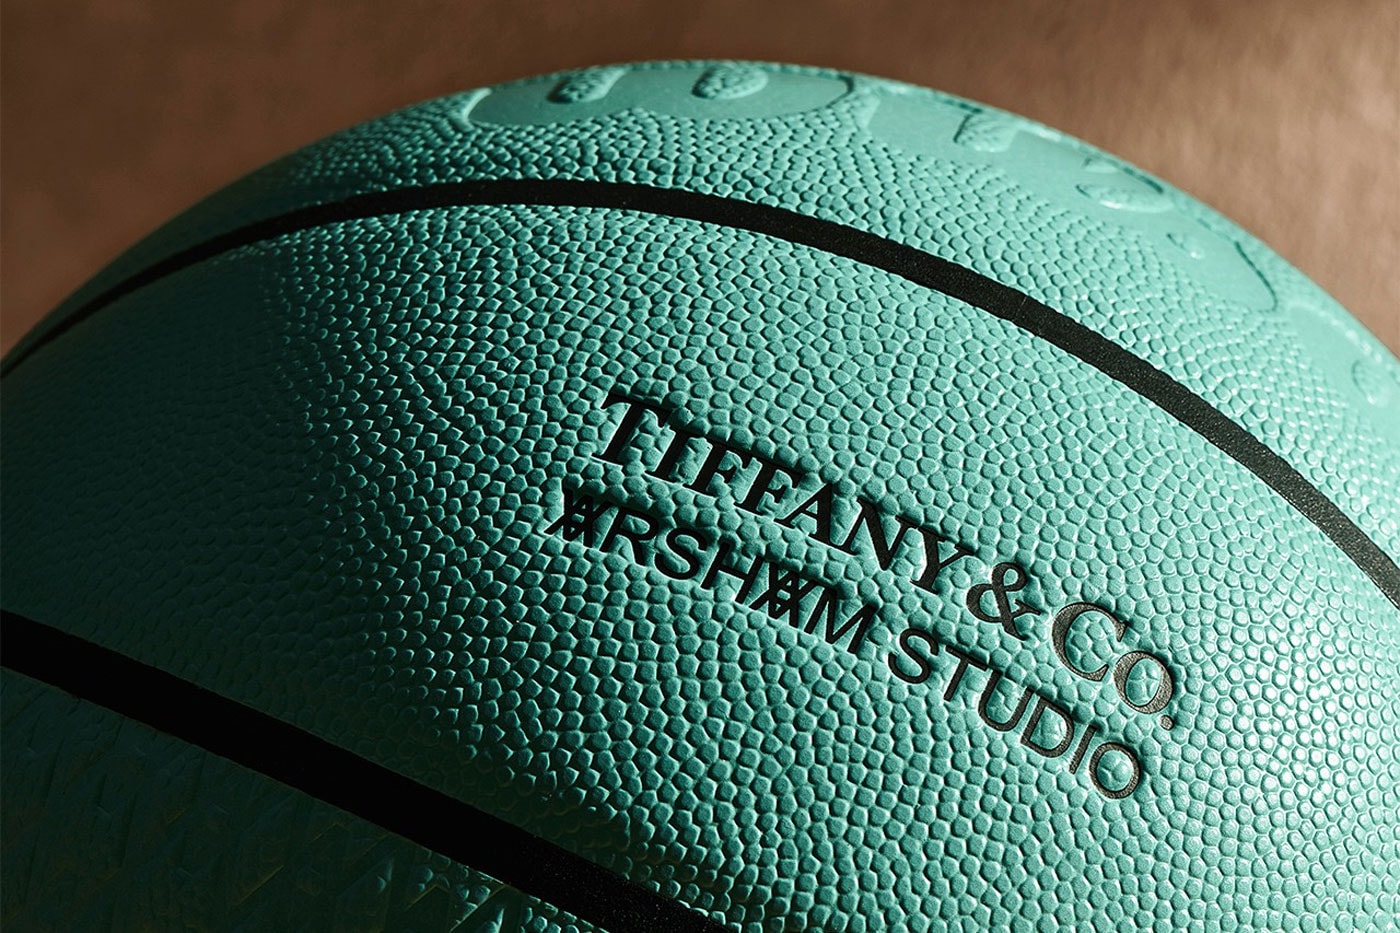 Wilson and Tiffany & Co. Basketball for the NBA All-Star Game 2022